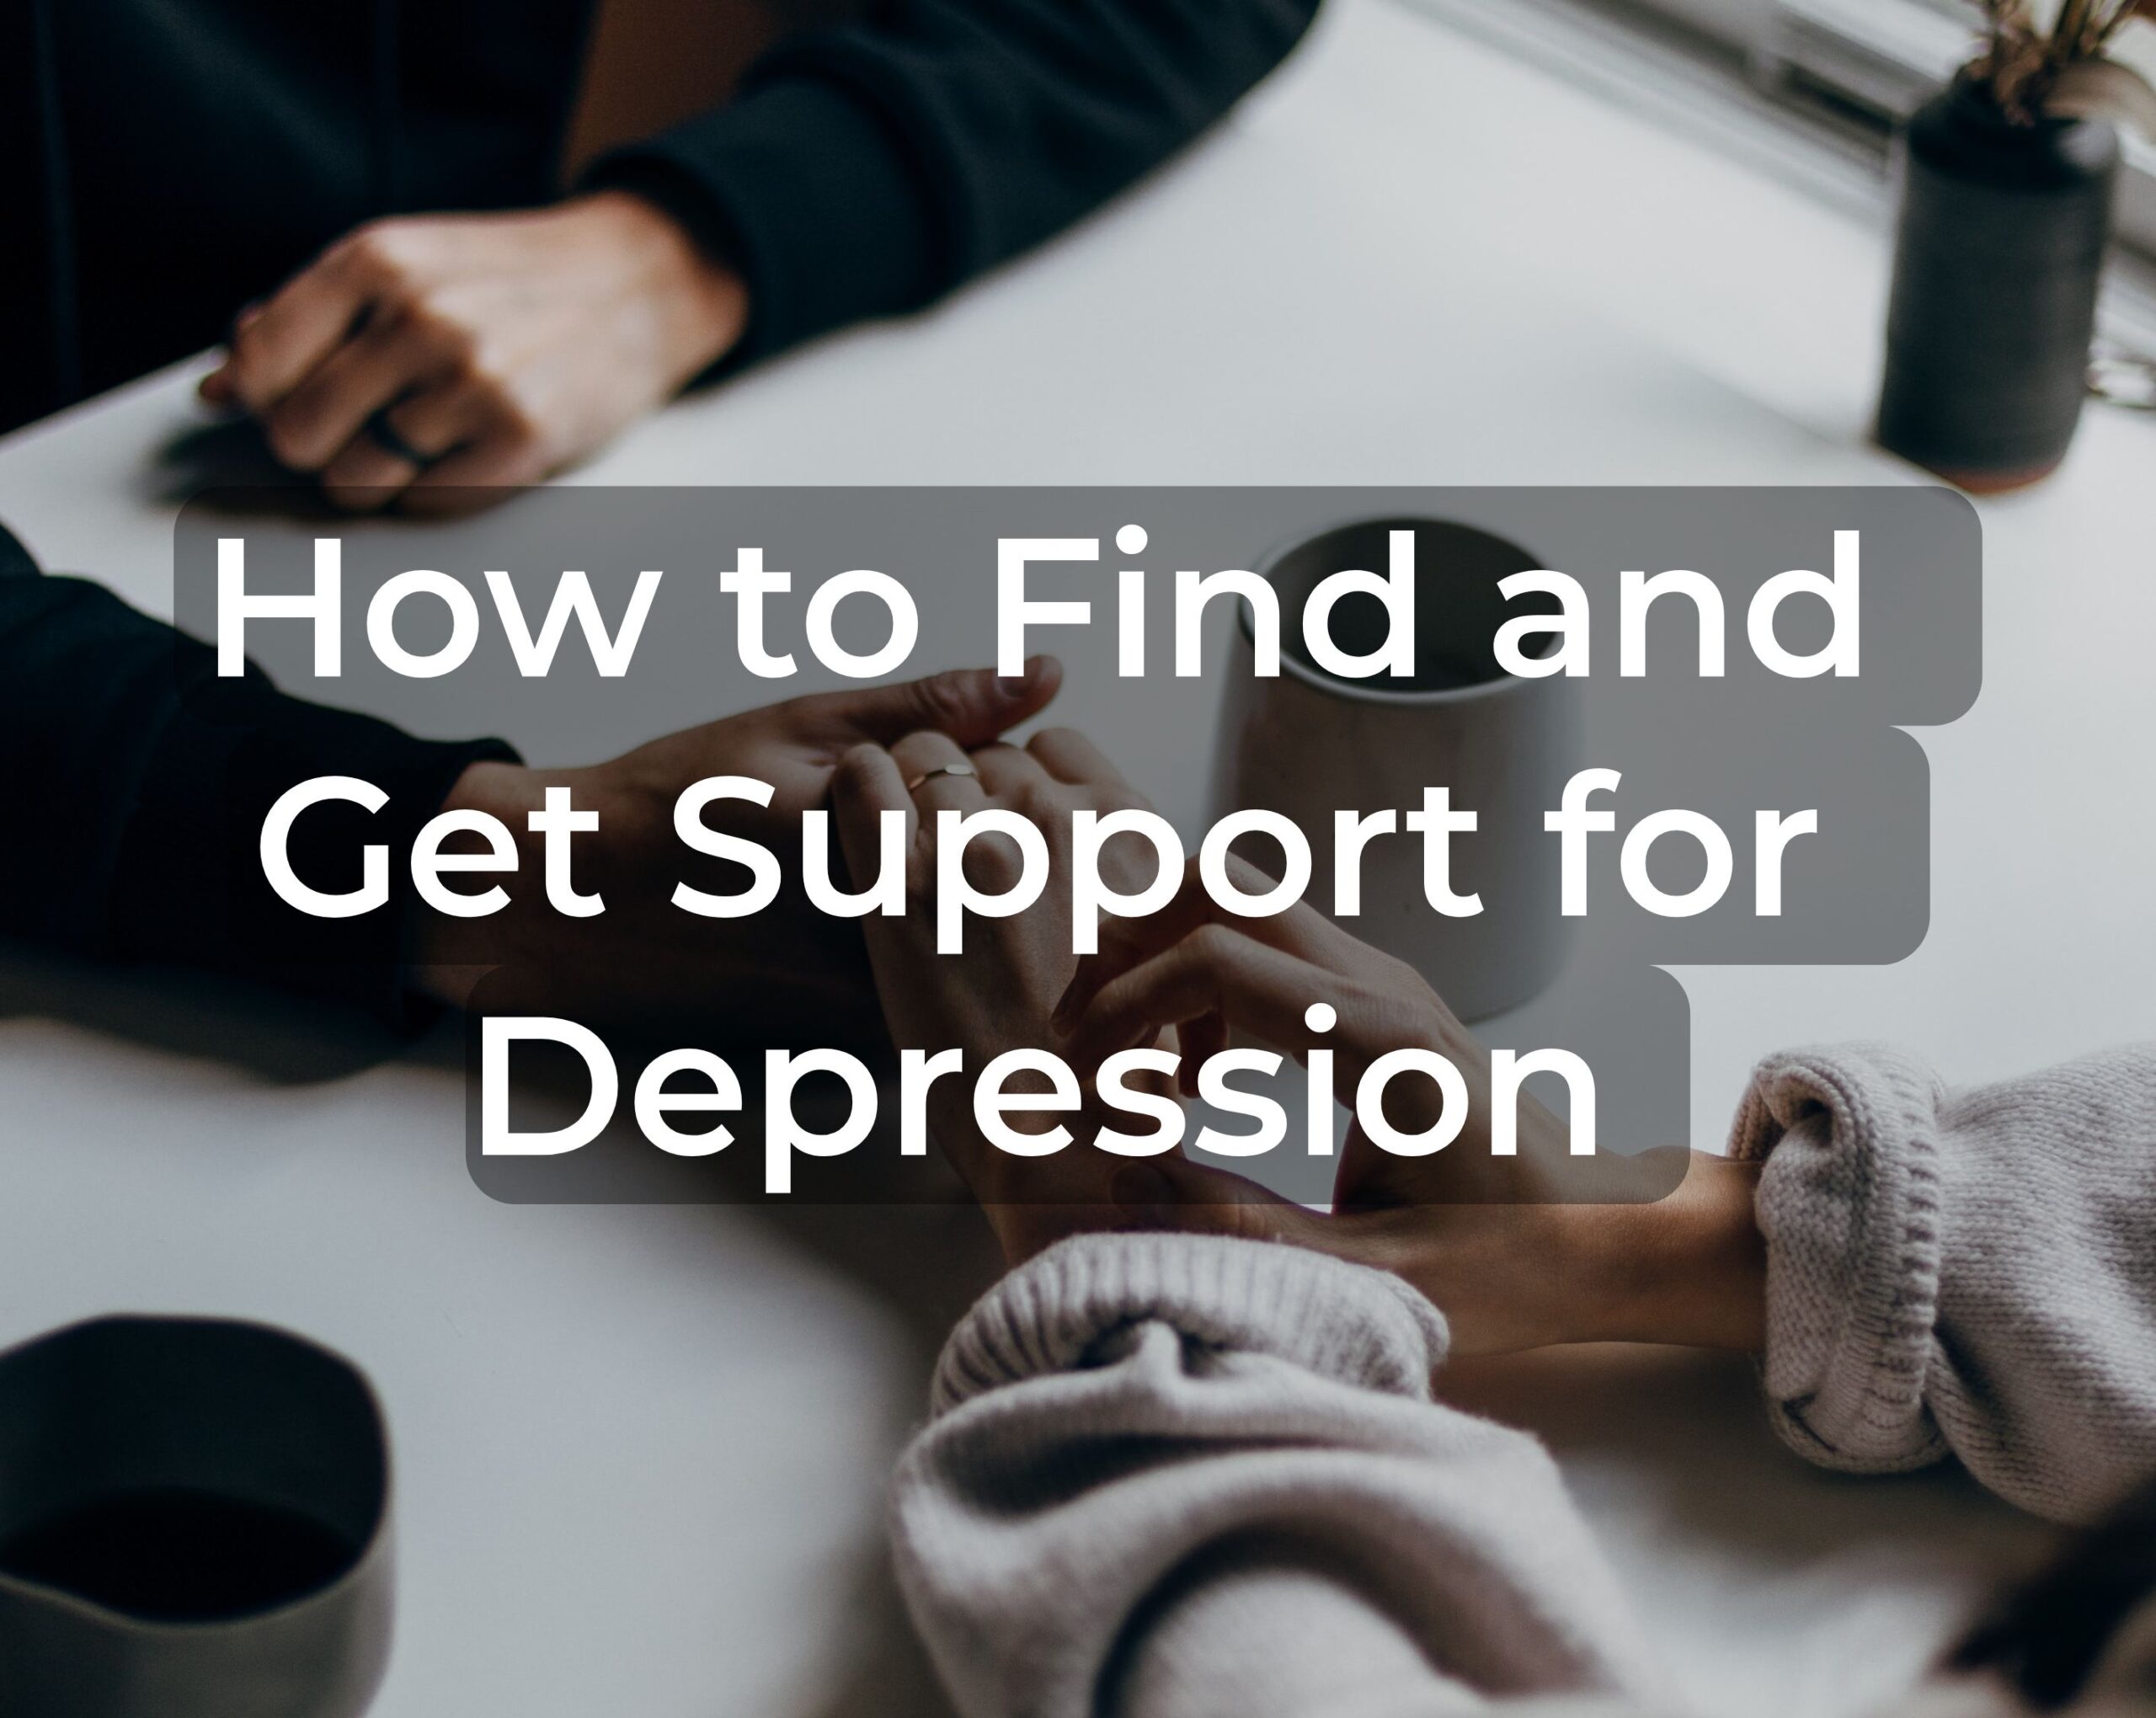 How to Find and Get Support for Depression